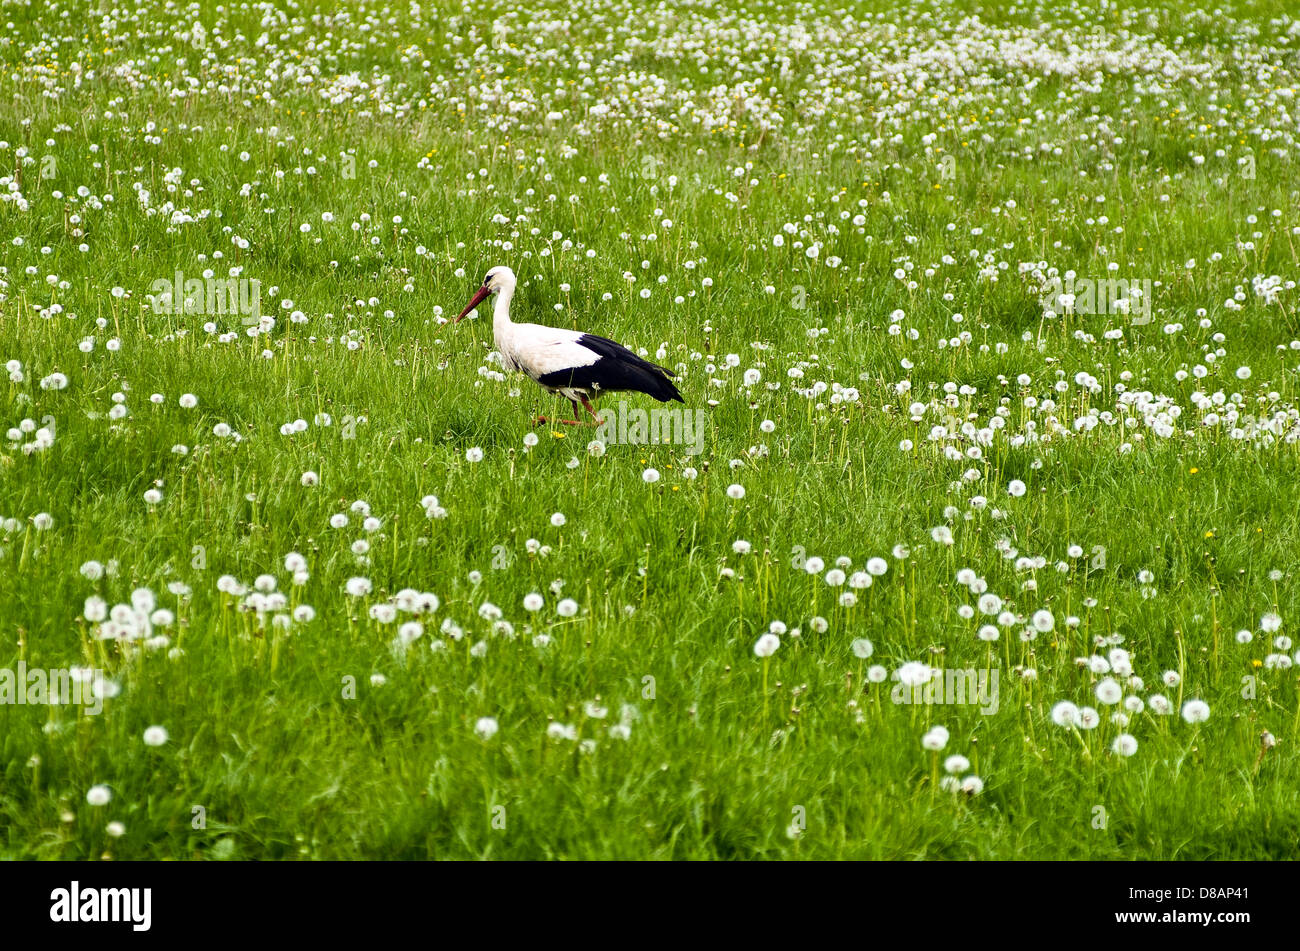 Stork looking for food on the lawn. Stock Photo